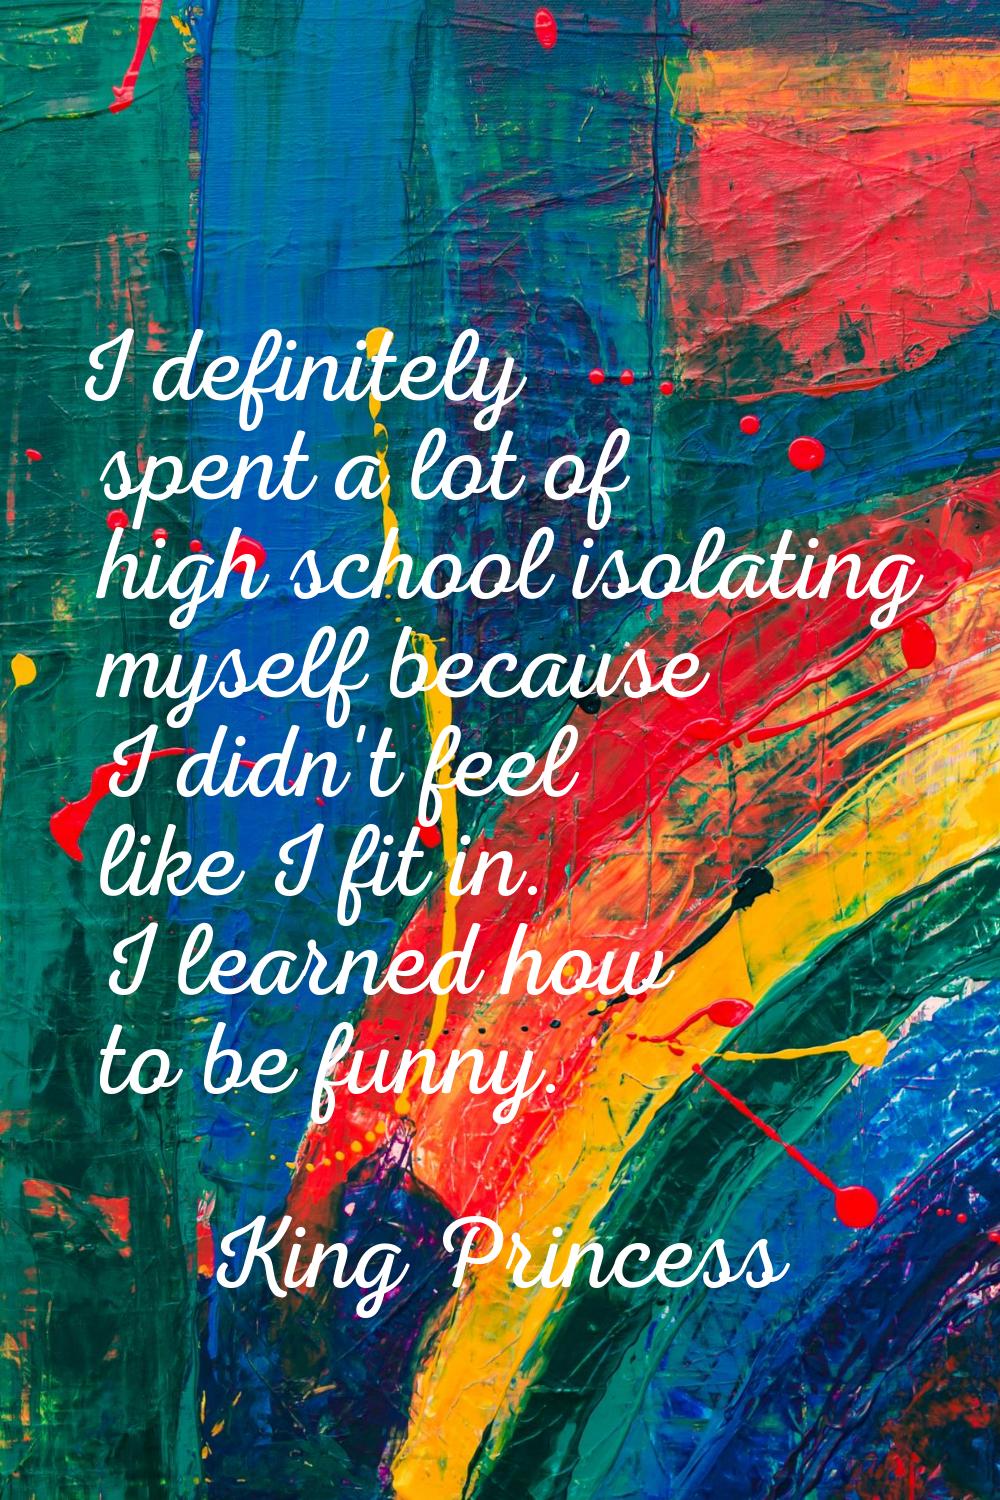 I definitely spent a lot of high school isolating myself because I didn't feel like I fit in. I lea